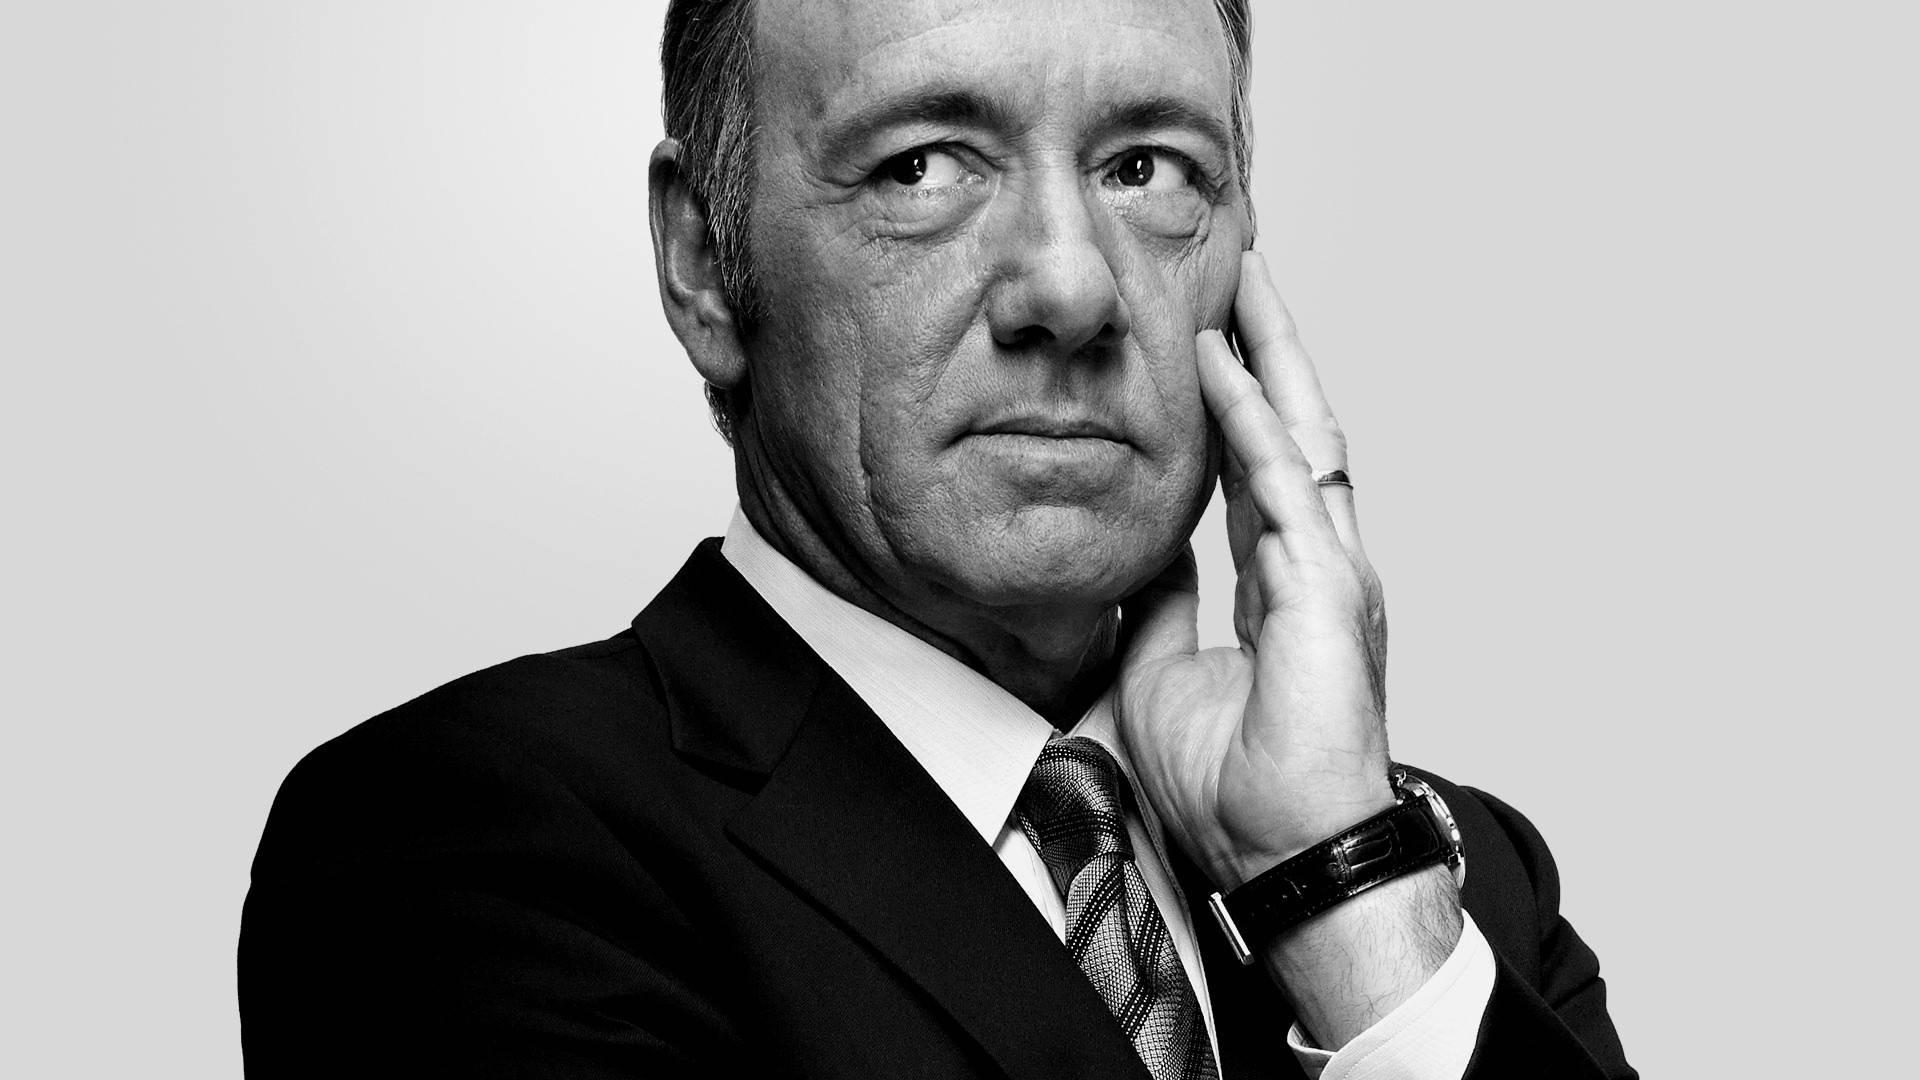 Francis Underwood Of House Of Cards Grayscale Photo Wallpaper